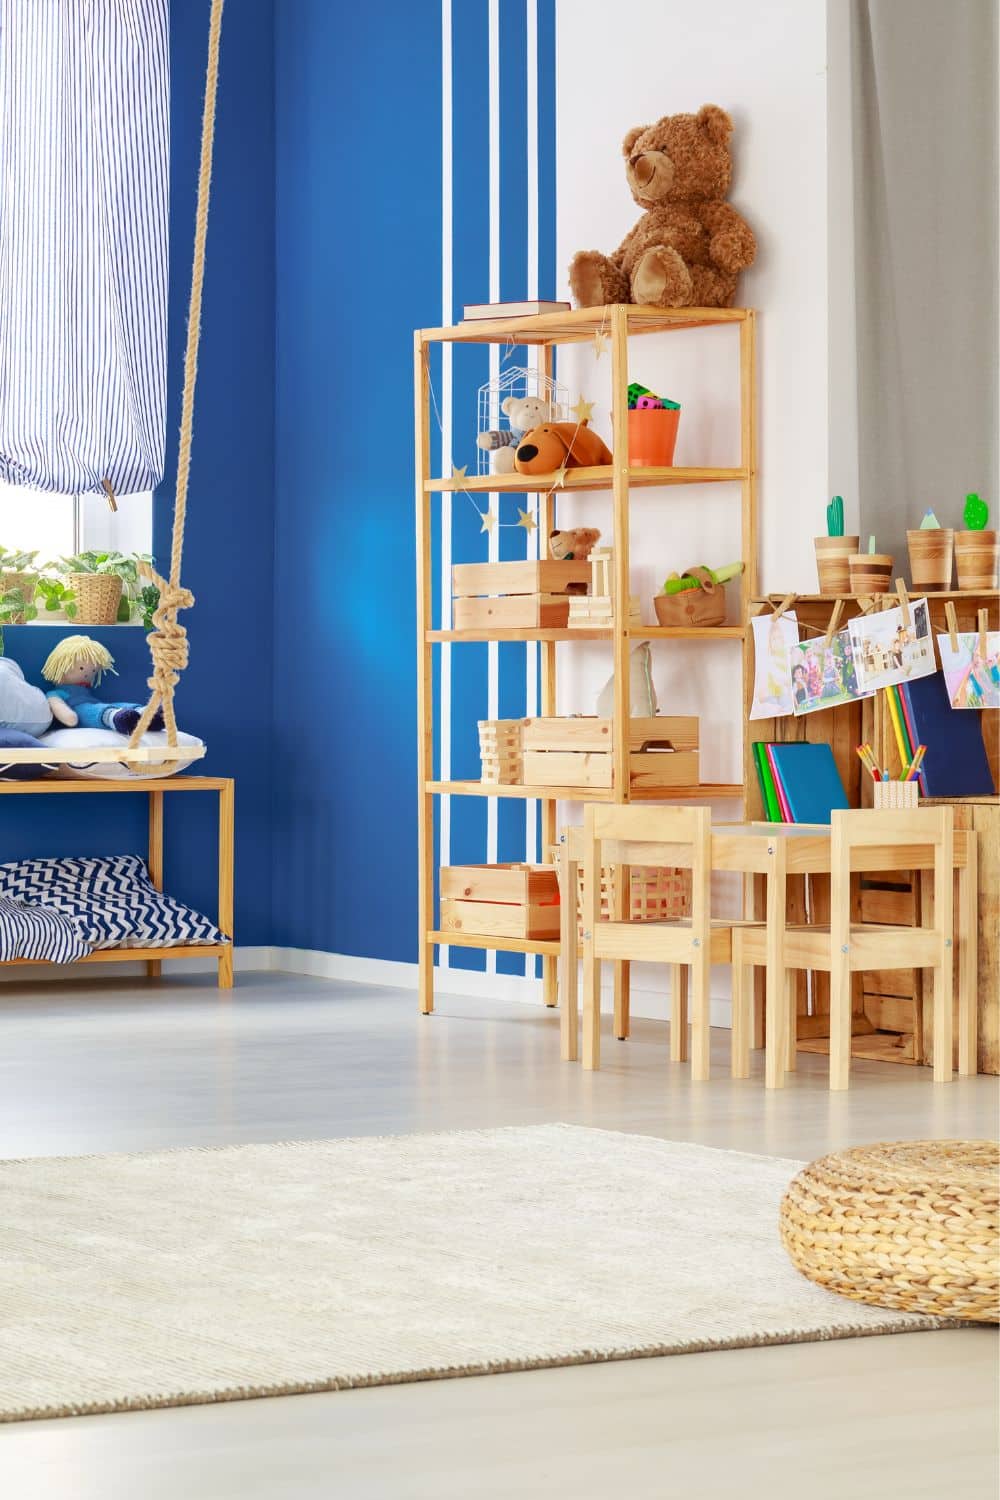 What safe and creative approaches can you explore when involving kids in room design